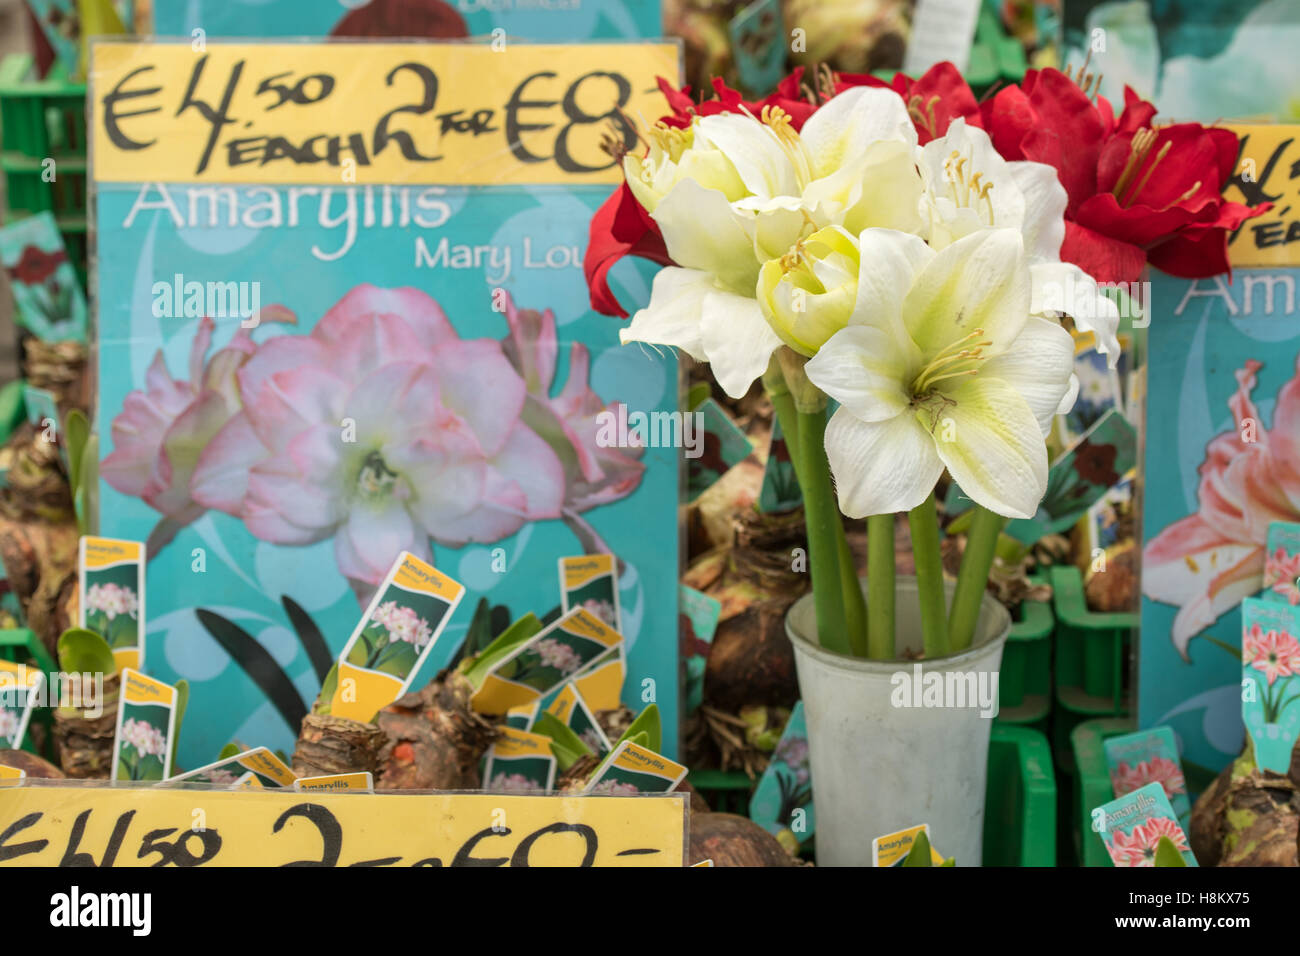 Amsterdam, Netherlands close up of Amaryllis flower bulbs for sale in an outdoor market. Stock Photo